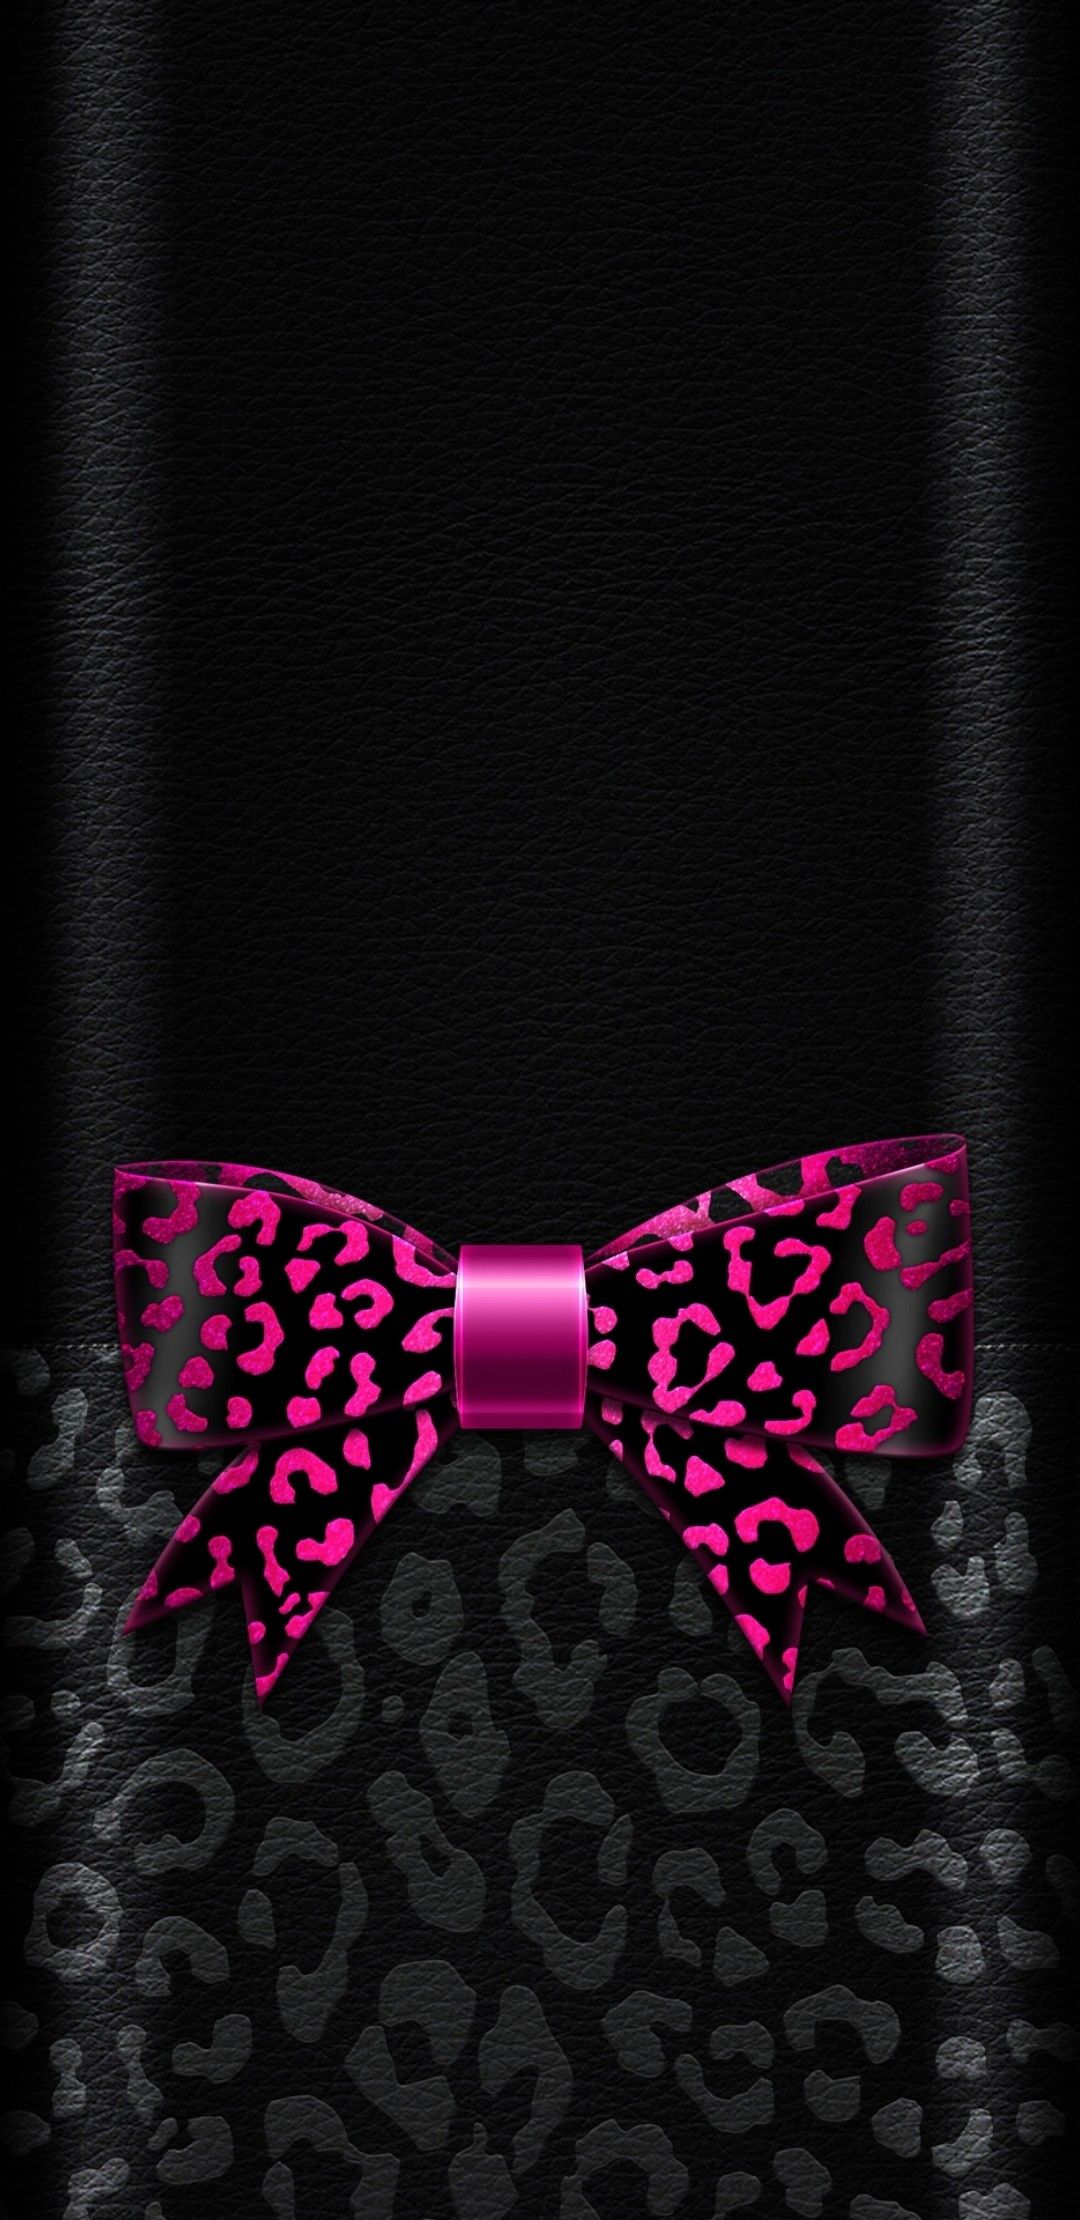 Black and pink bow, #wallpaper #cute #girly. Bow wallpaper iphone, Bow wallpaper, Animal print wallpaper